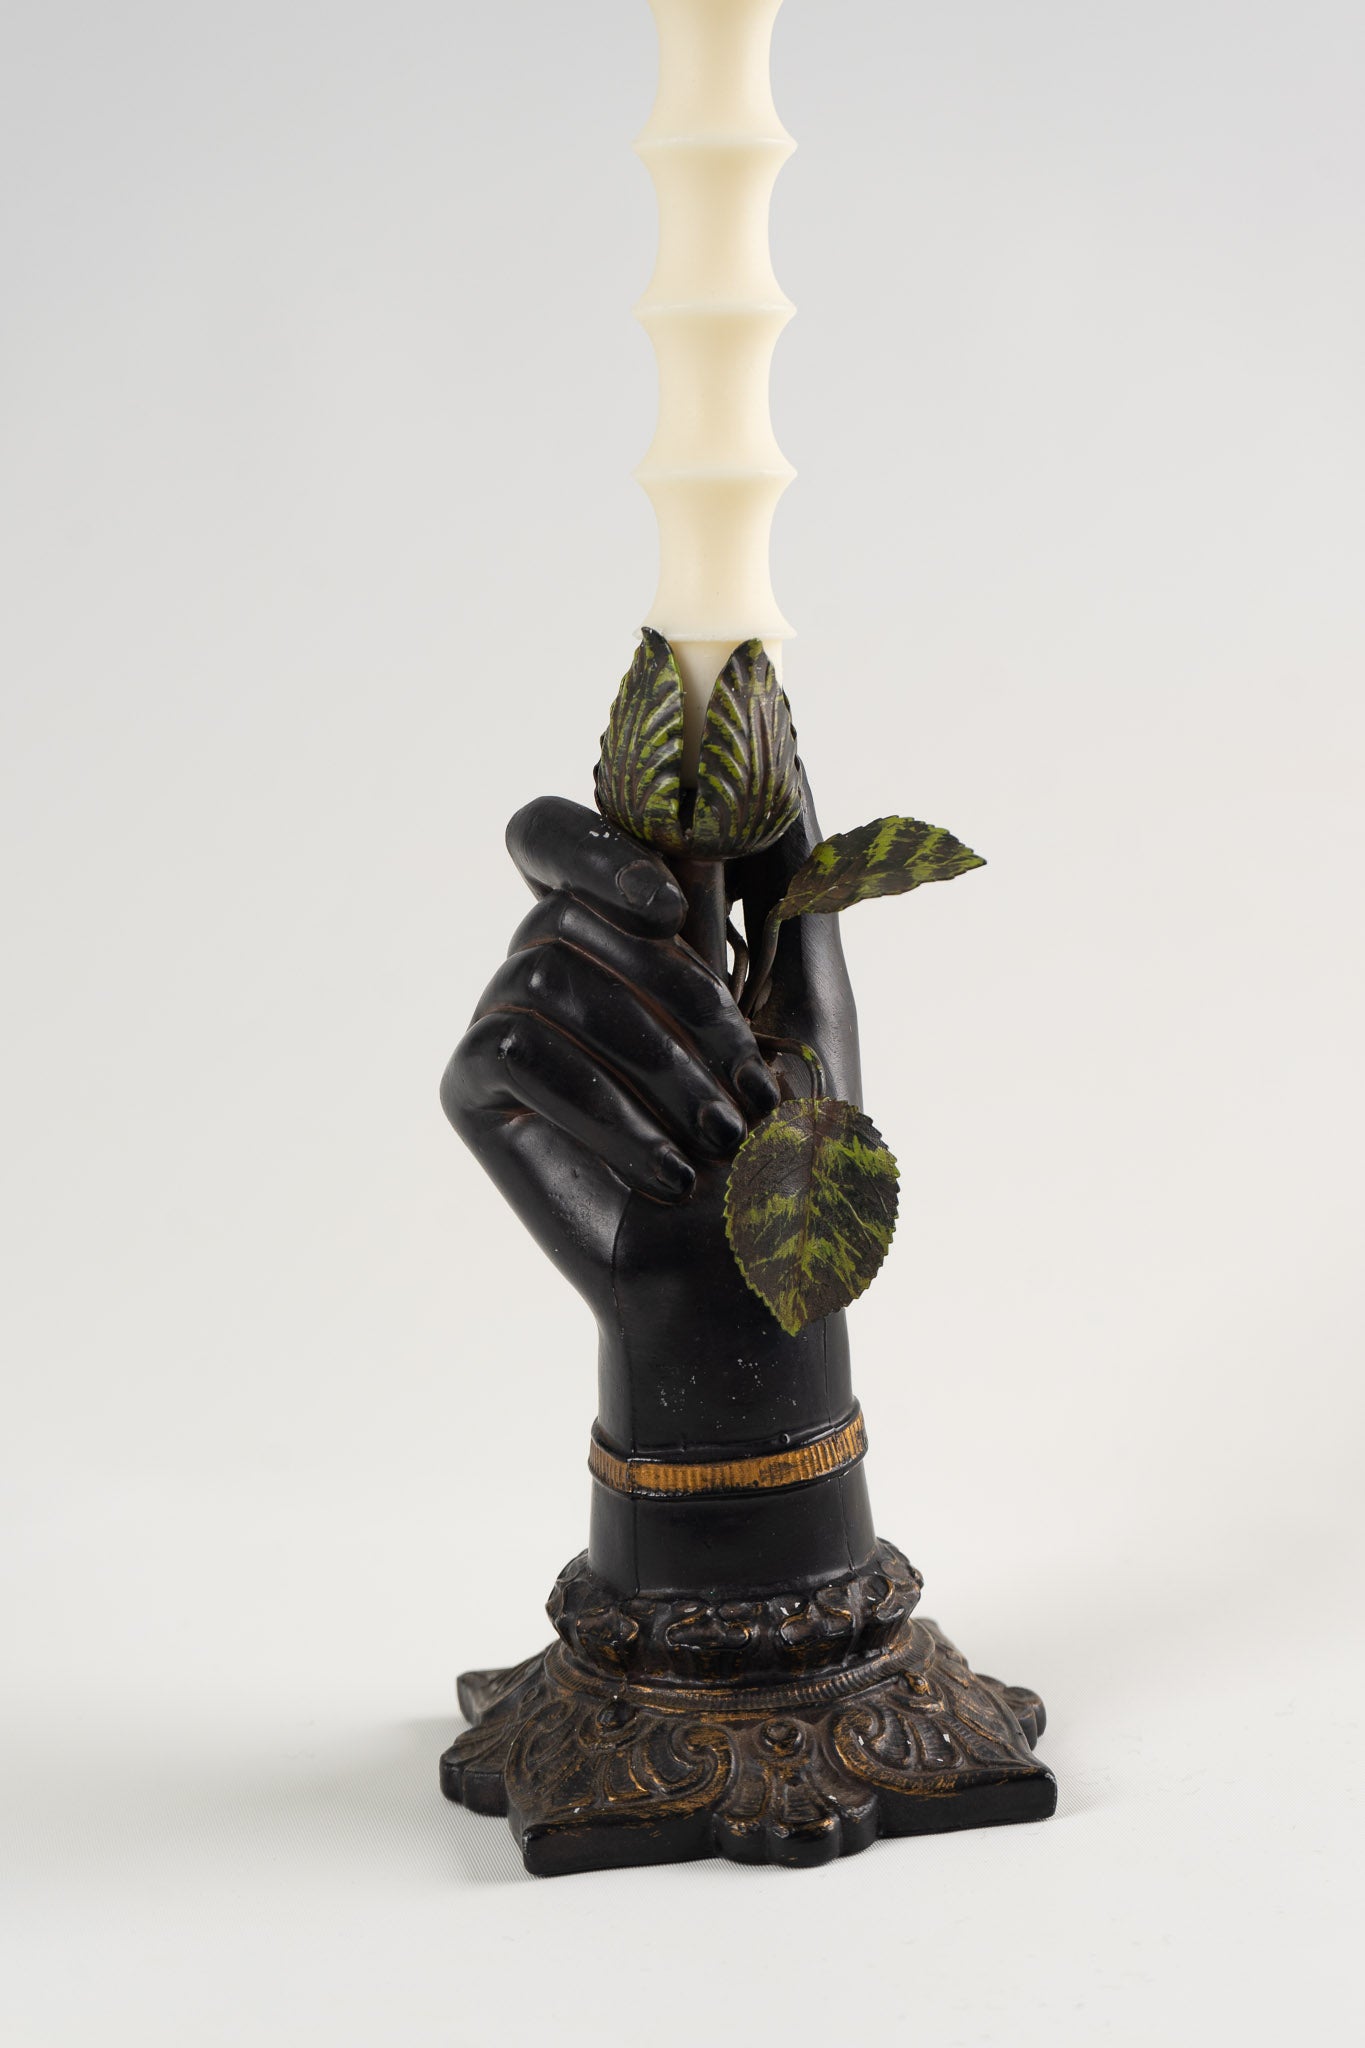 Load image into Gallery viewer, Vintage Petites Choses Iron Hand Candle Holder
